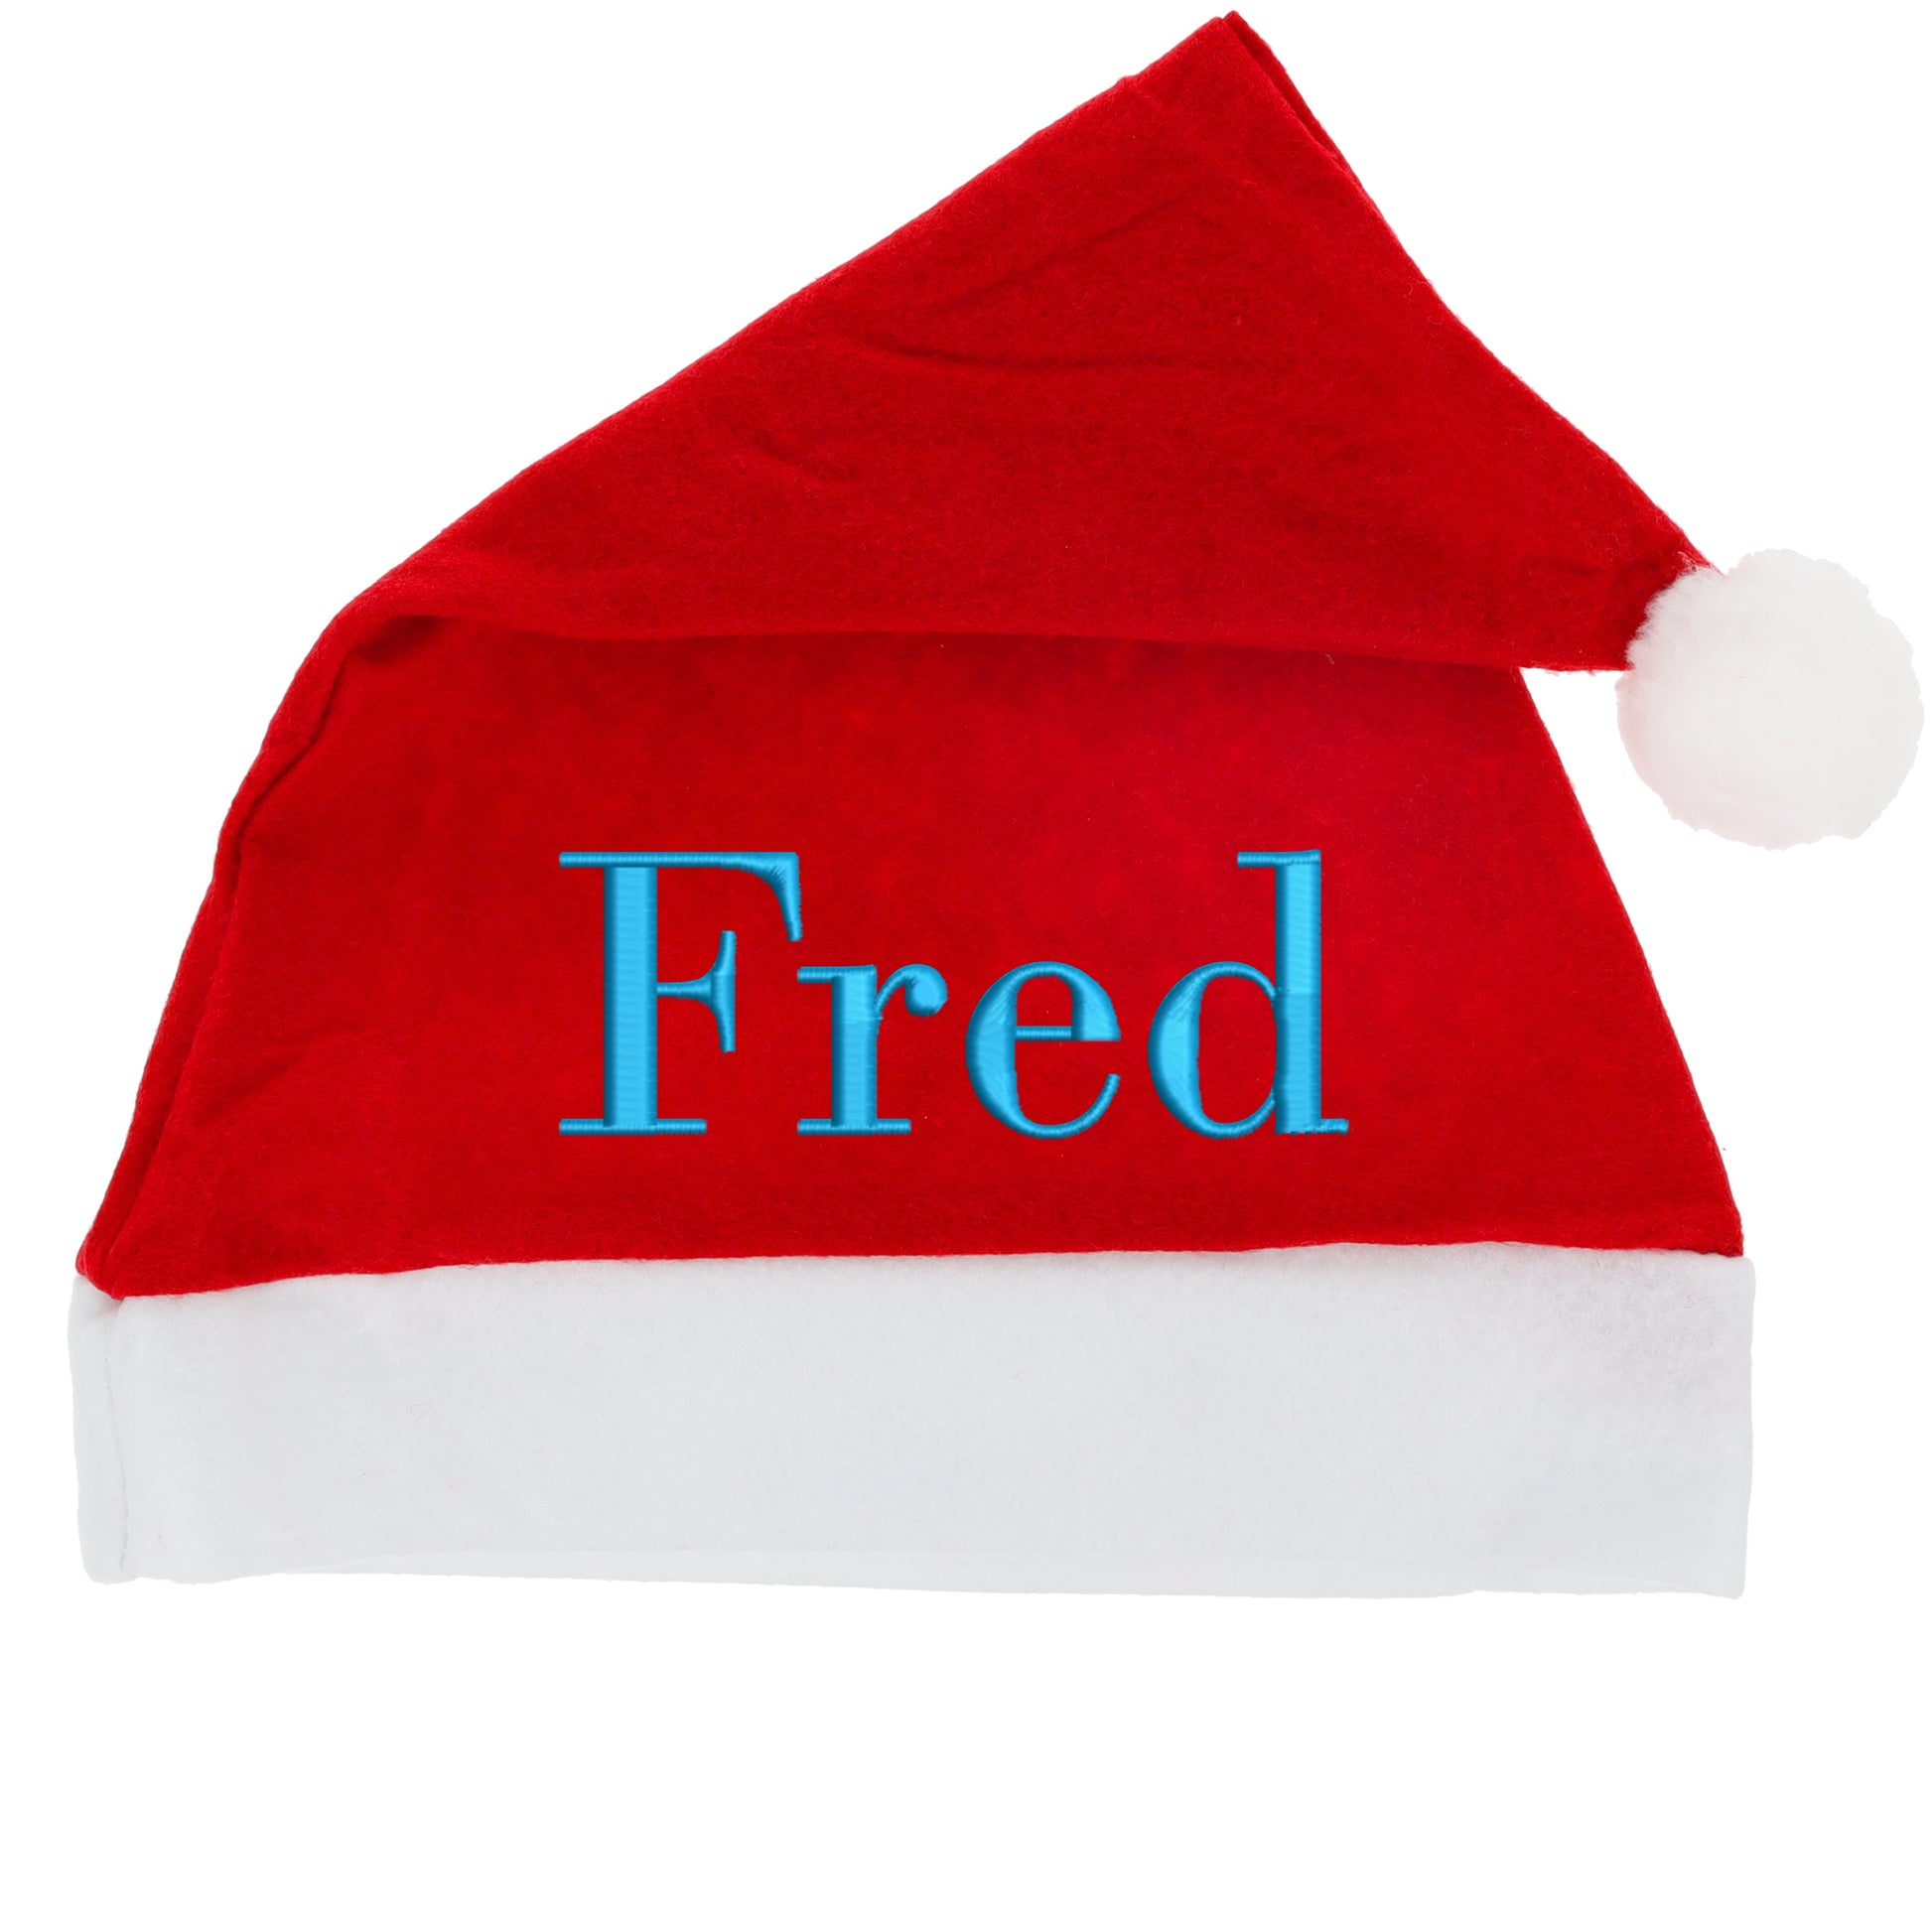 Custom Personalised Embroidered Santa Claus Hat - Any Name & Colour  - Always Looking Good -   